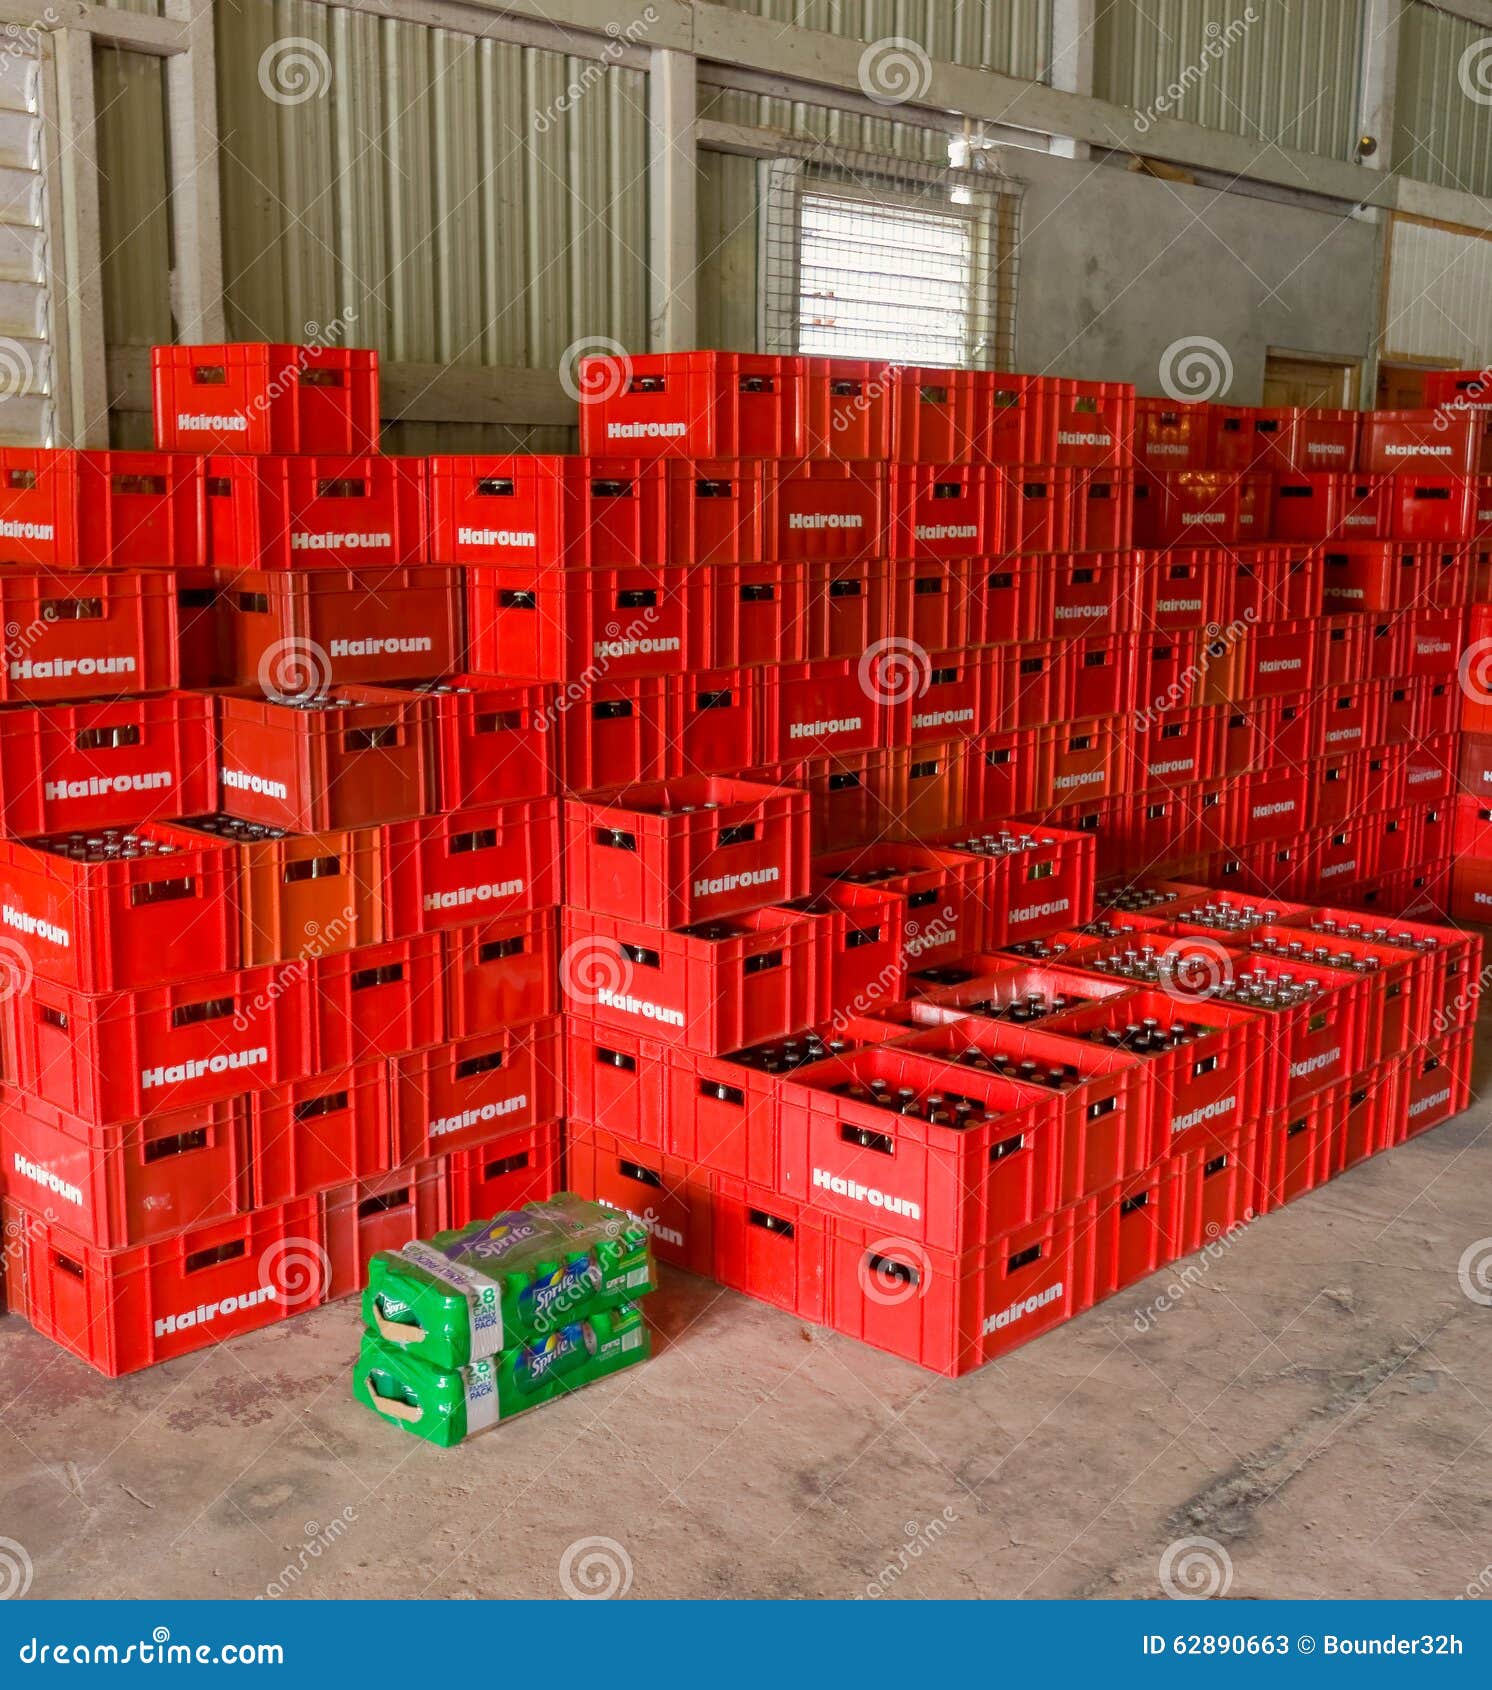 https://thumbs.dreamstime.com/z/beer-crates-depot-caribbean-red-plastic-boxes-containing-hairoun-local-brew-st-vincent-grenadines-62890663.jpg